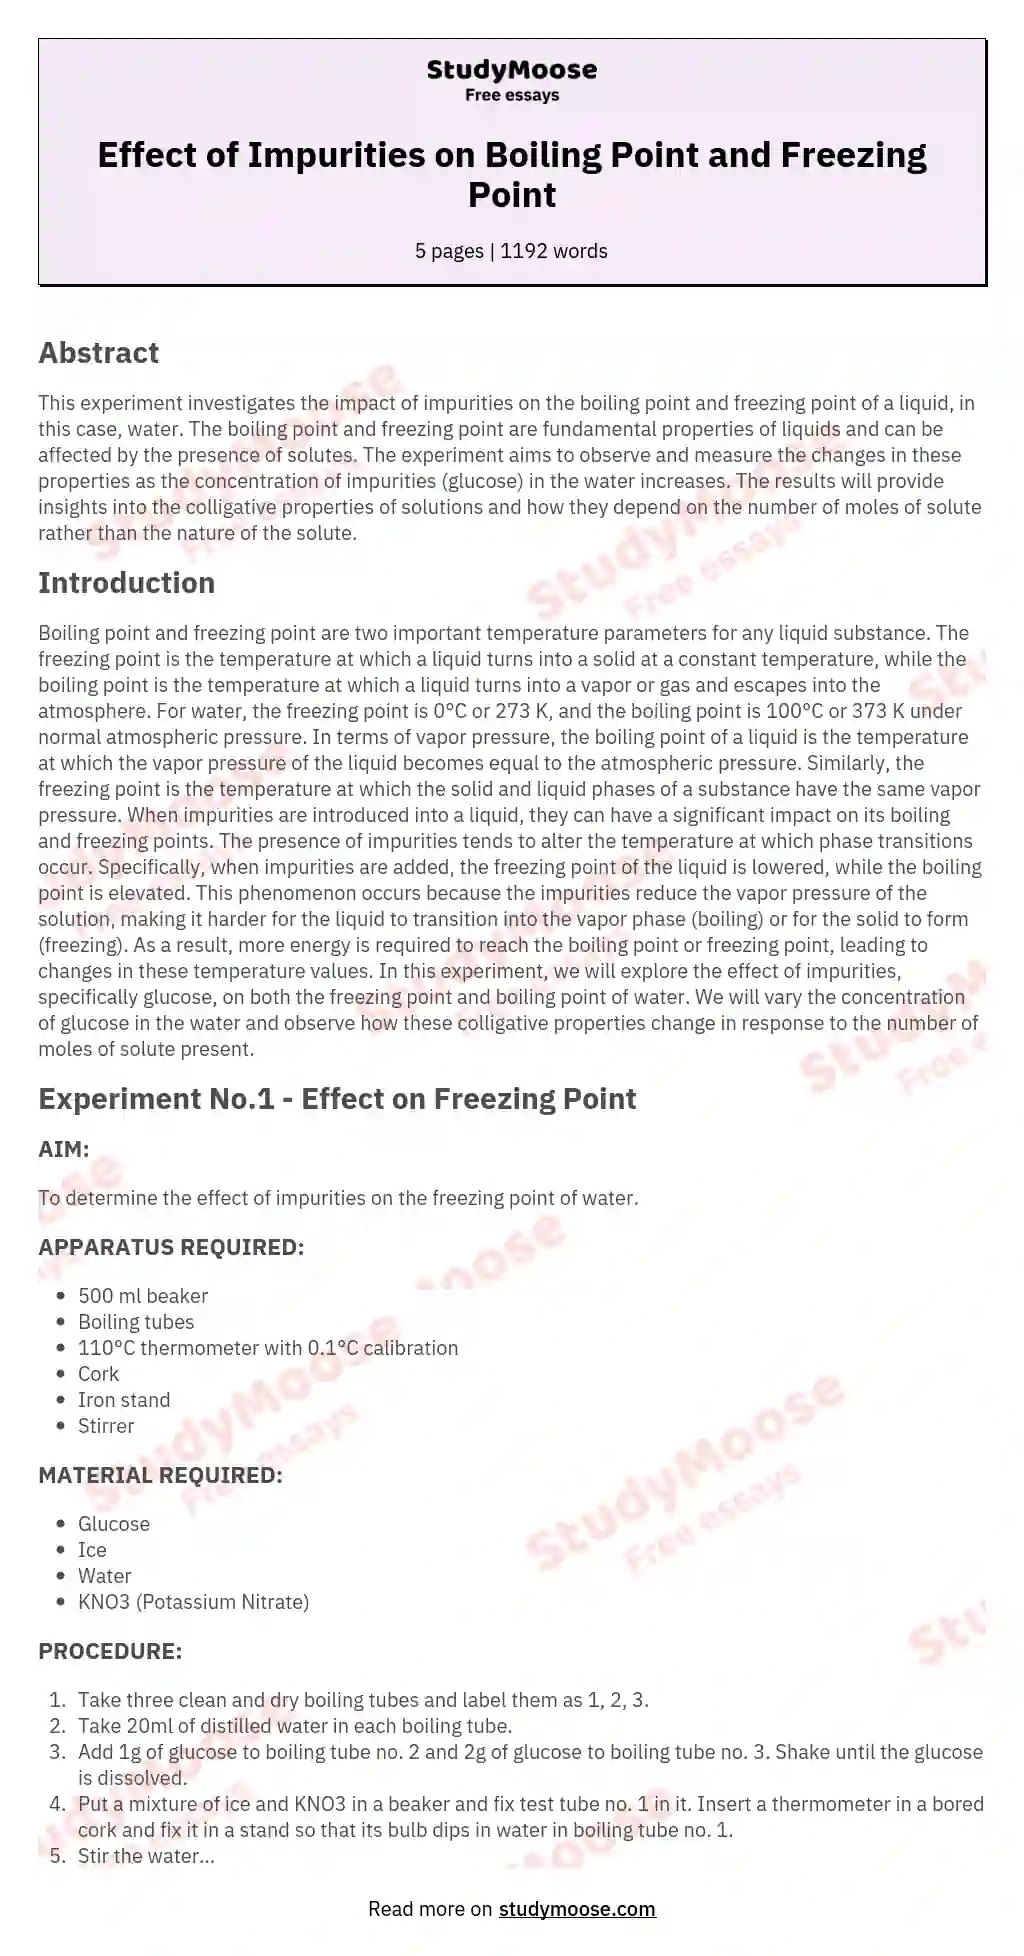 Effect of Impurities on Boiling Point and Freezing Point essay